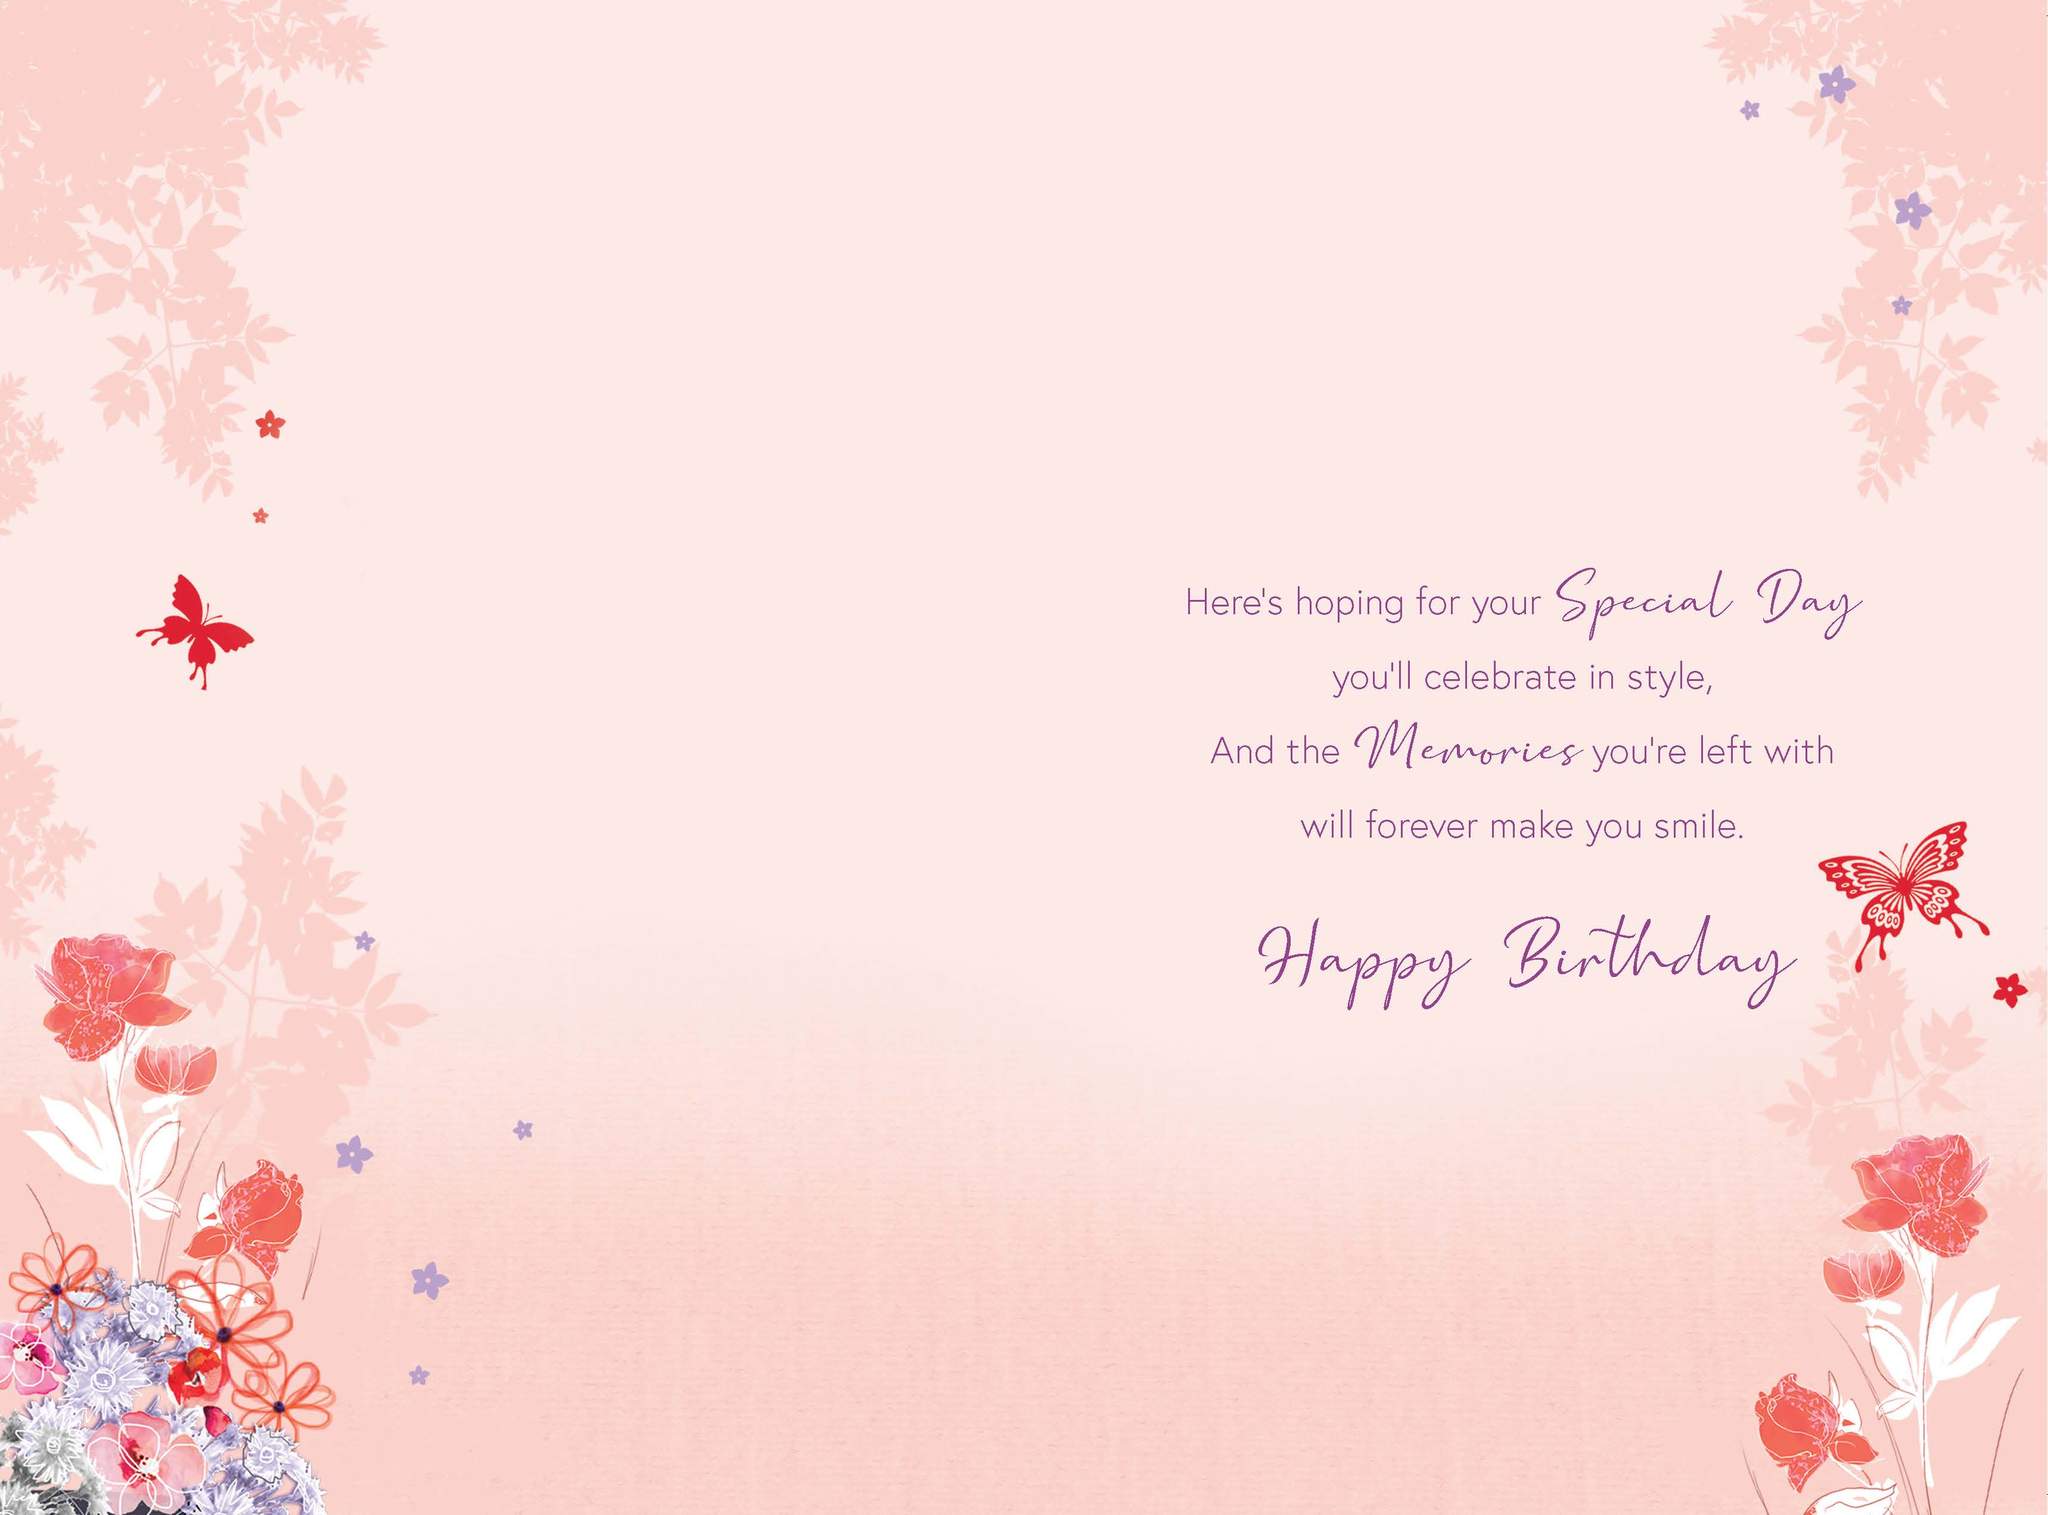 Daughter-in-Law Birthday Card - Variations of Flowers